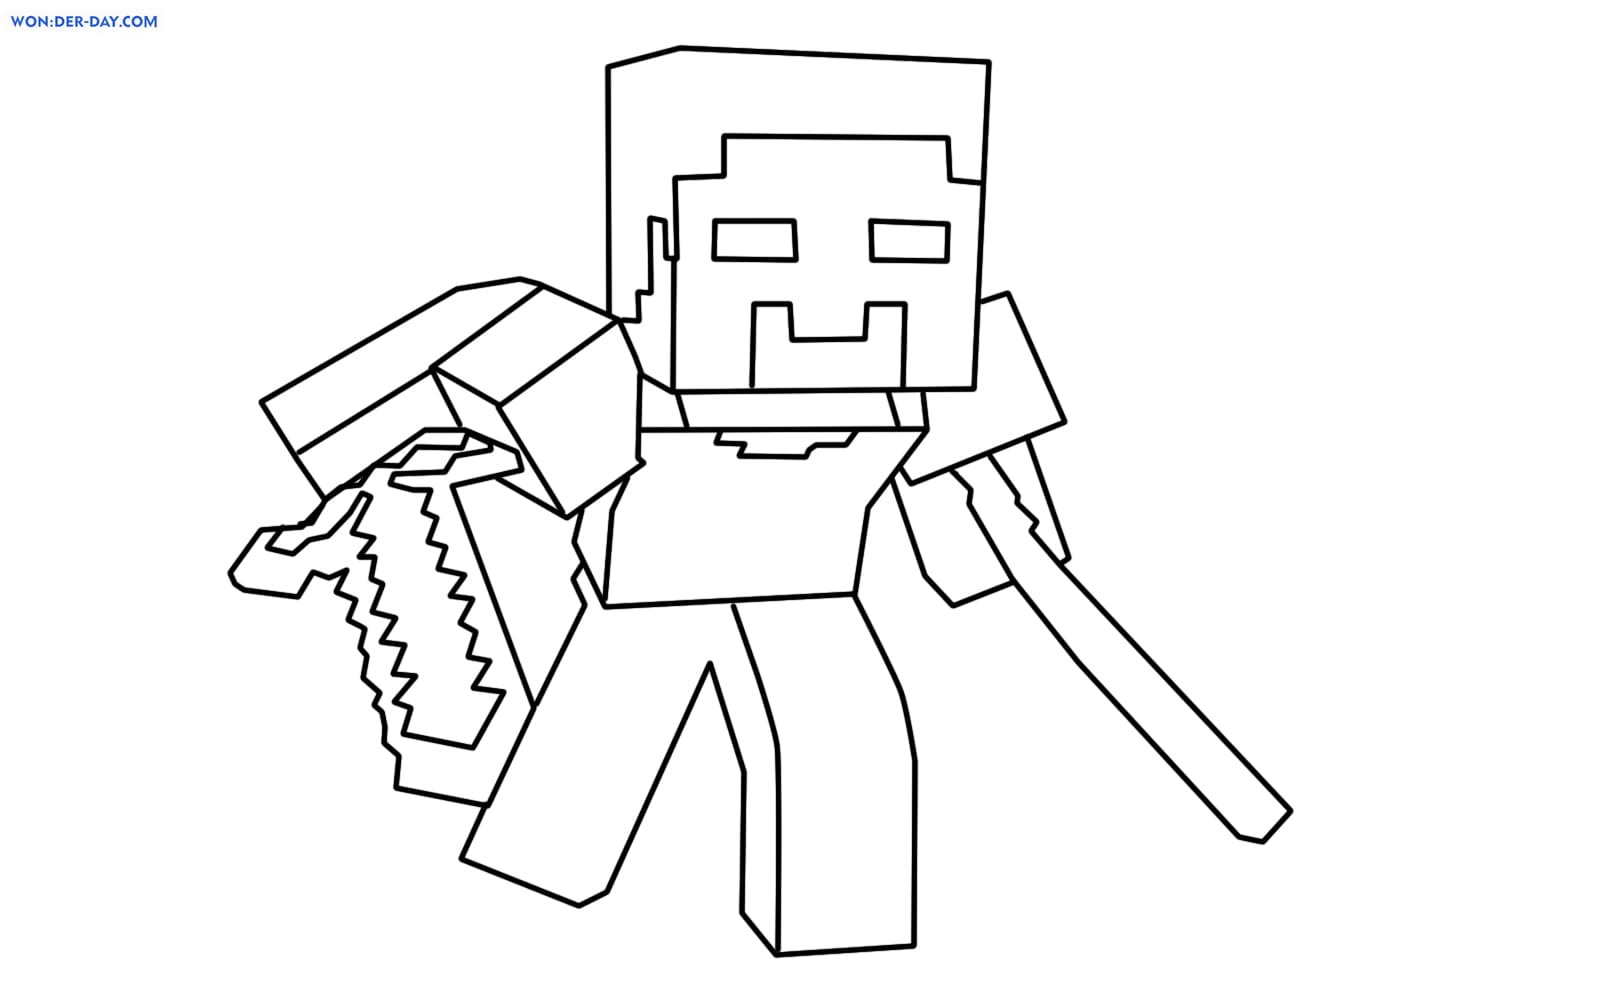 Herobrine Minecraft Coloring Pages Wonder Day Colorin - vrogue.co